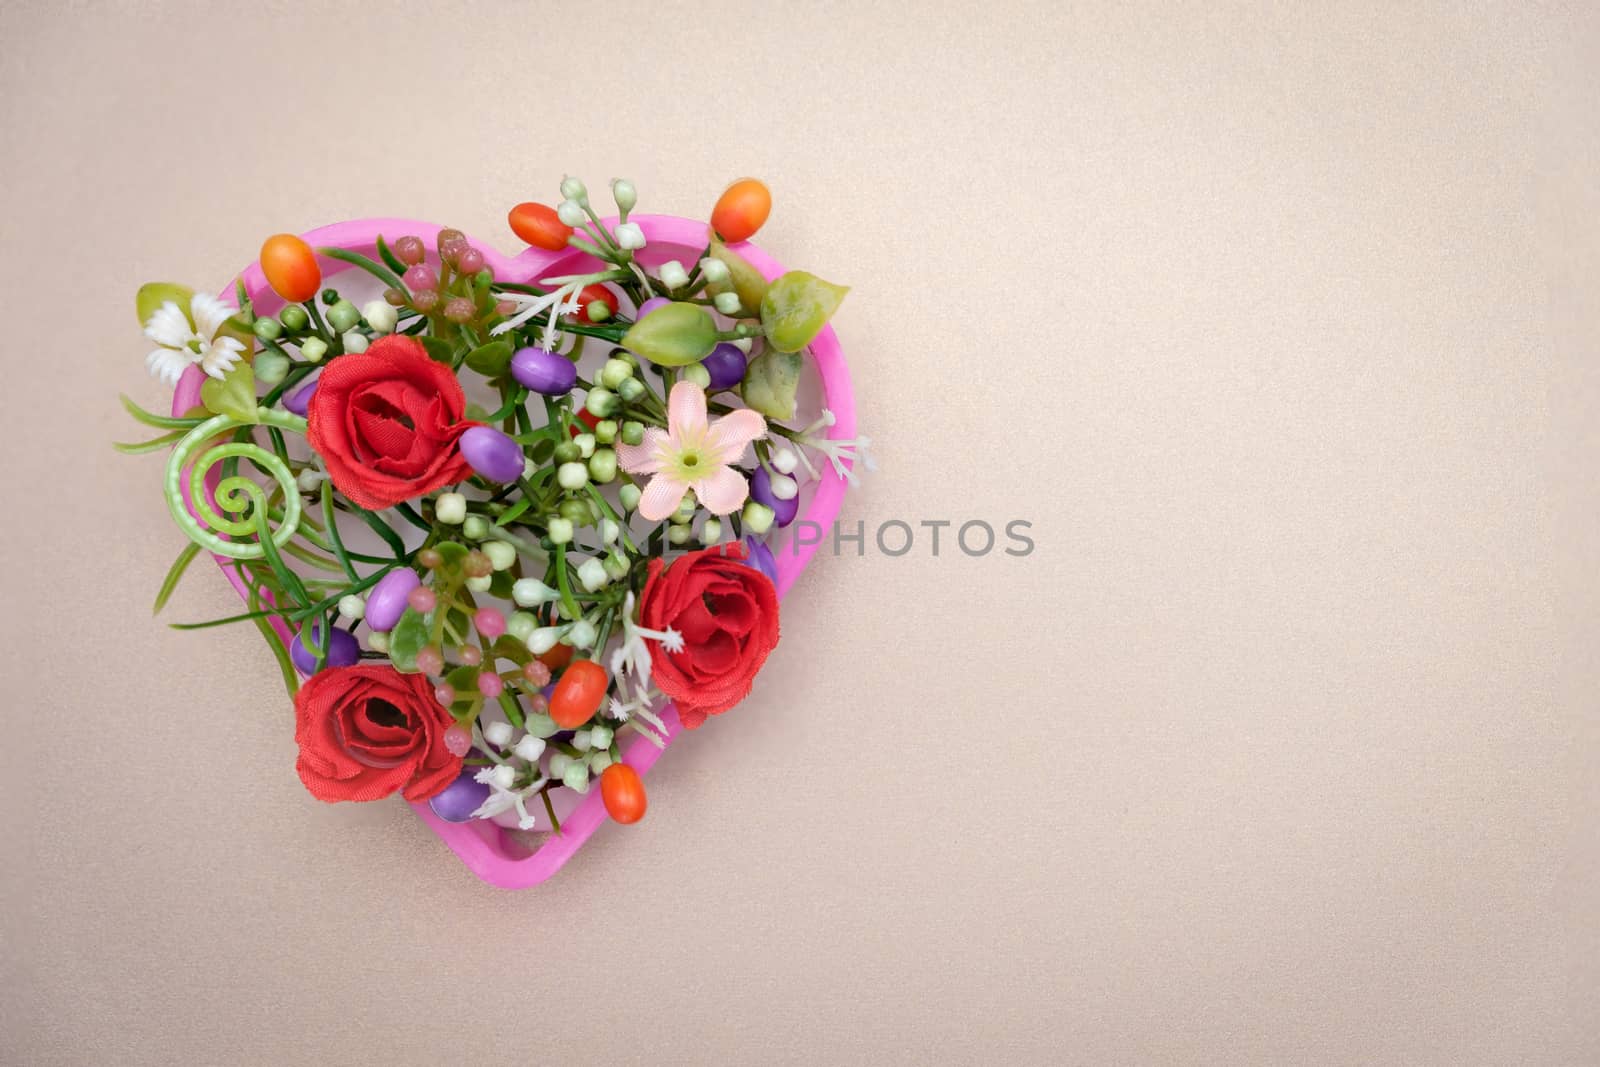 The flowers are in a heart shaped pot, valentine concept.